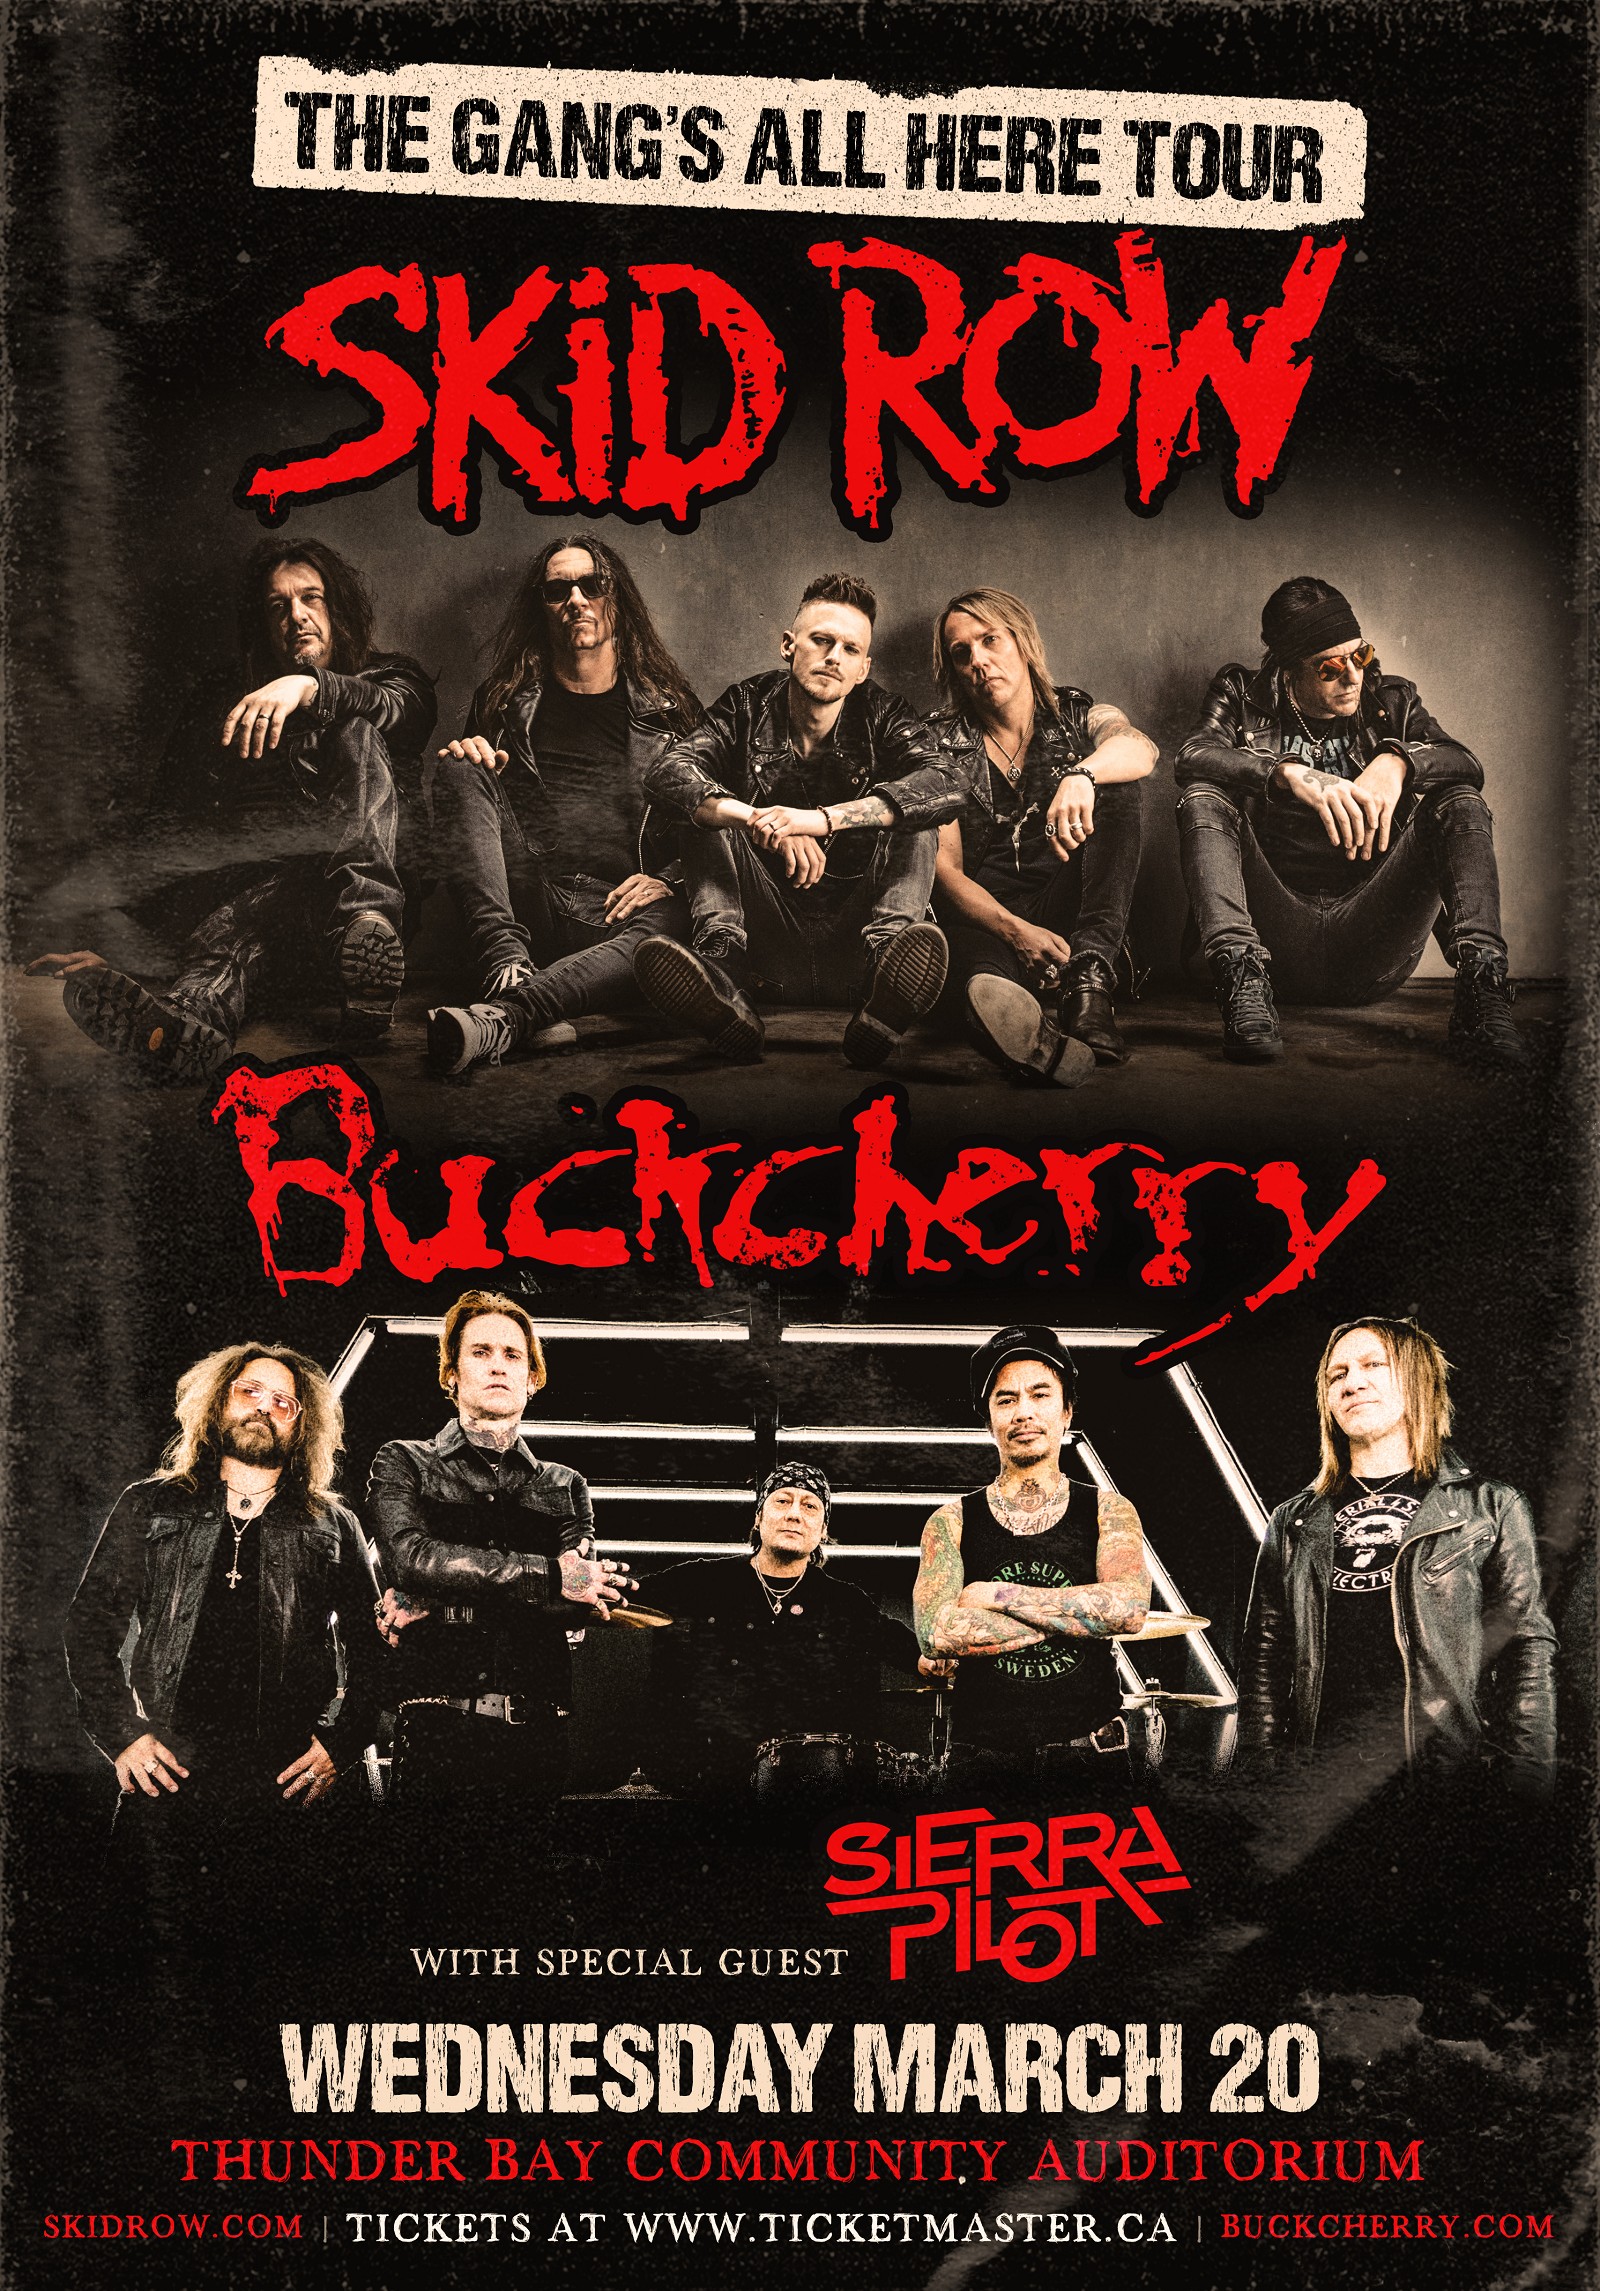 The Gang's All Here Tour With Skid Row And Buckcherry